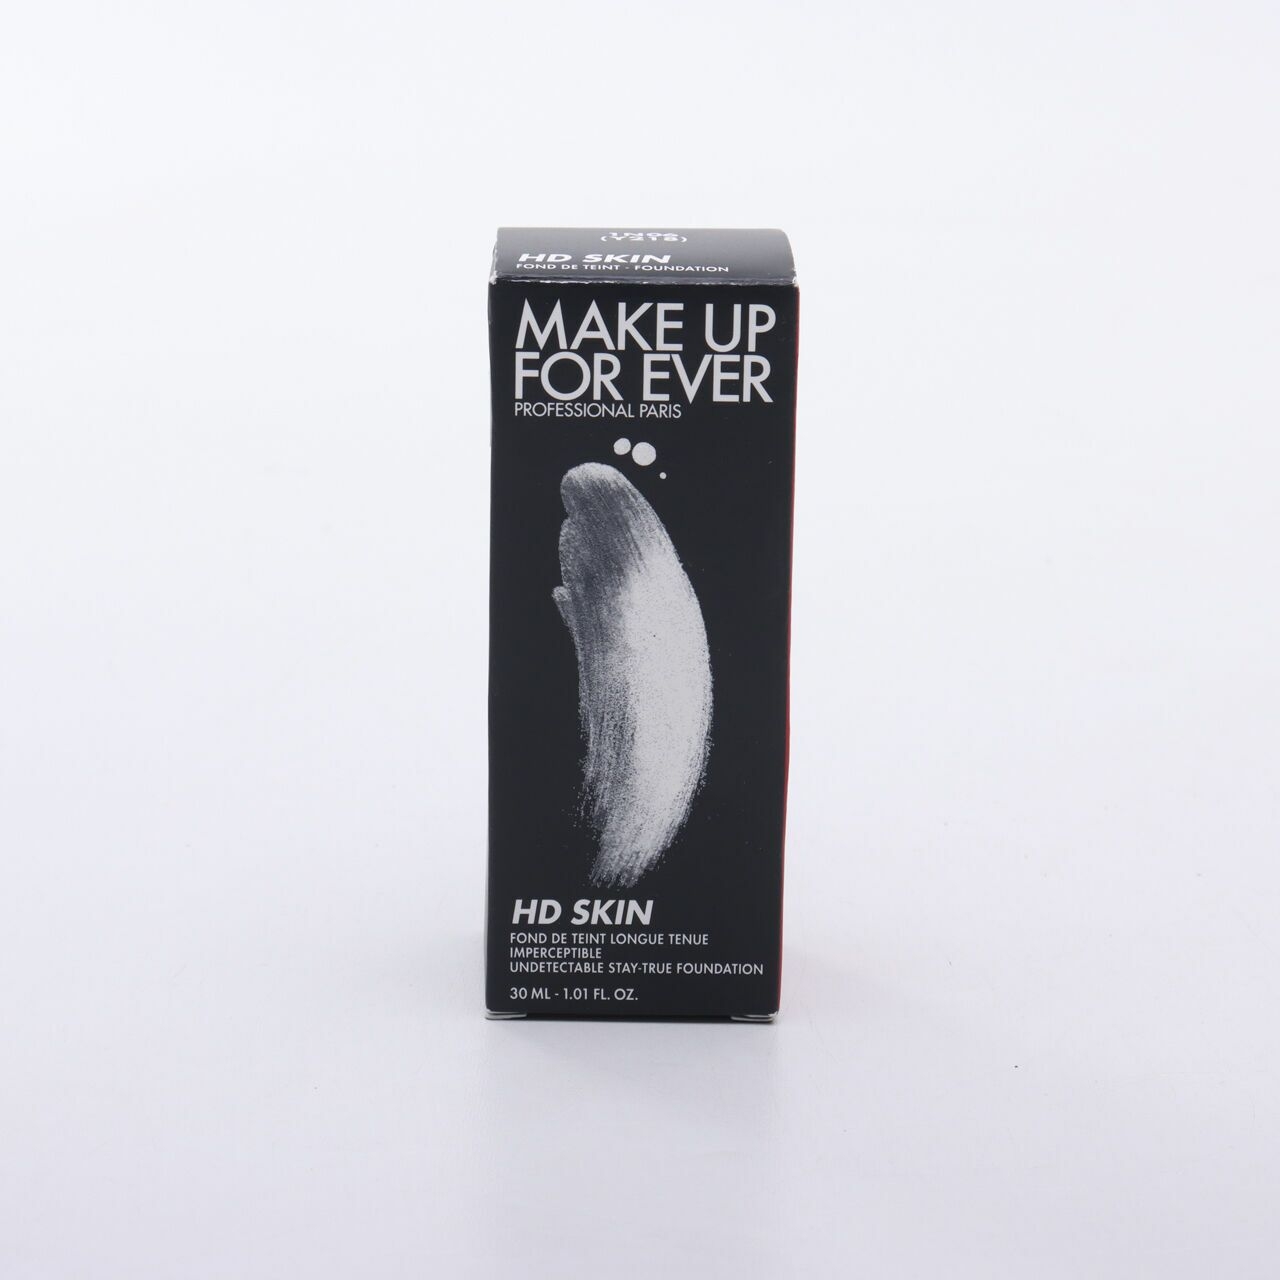 Make Up For Ever HD Skin (Y218) Foundation Faces